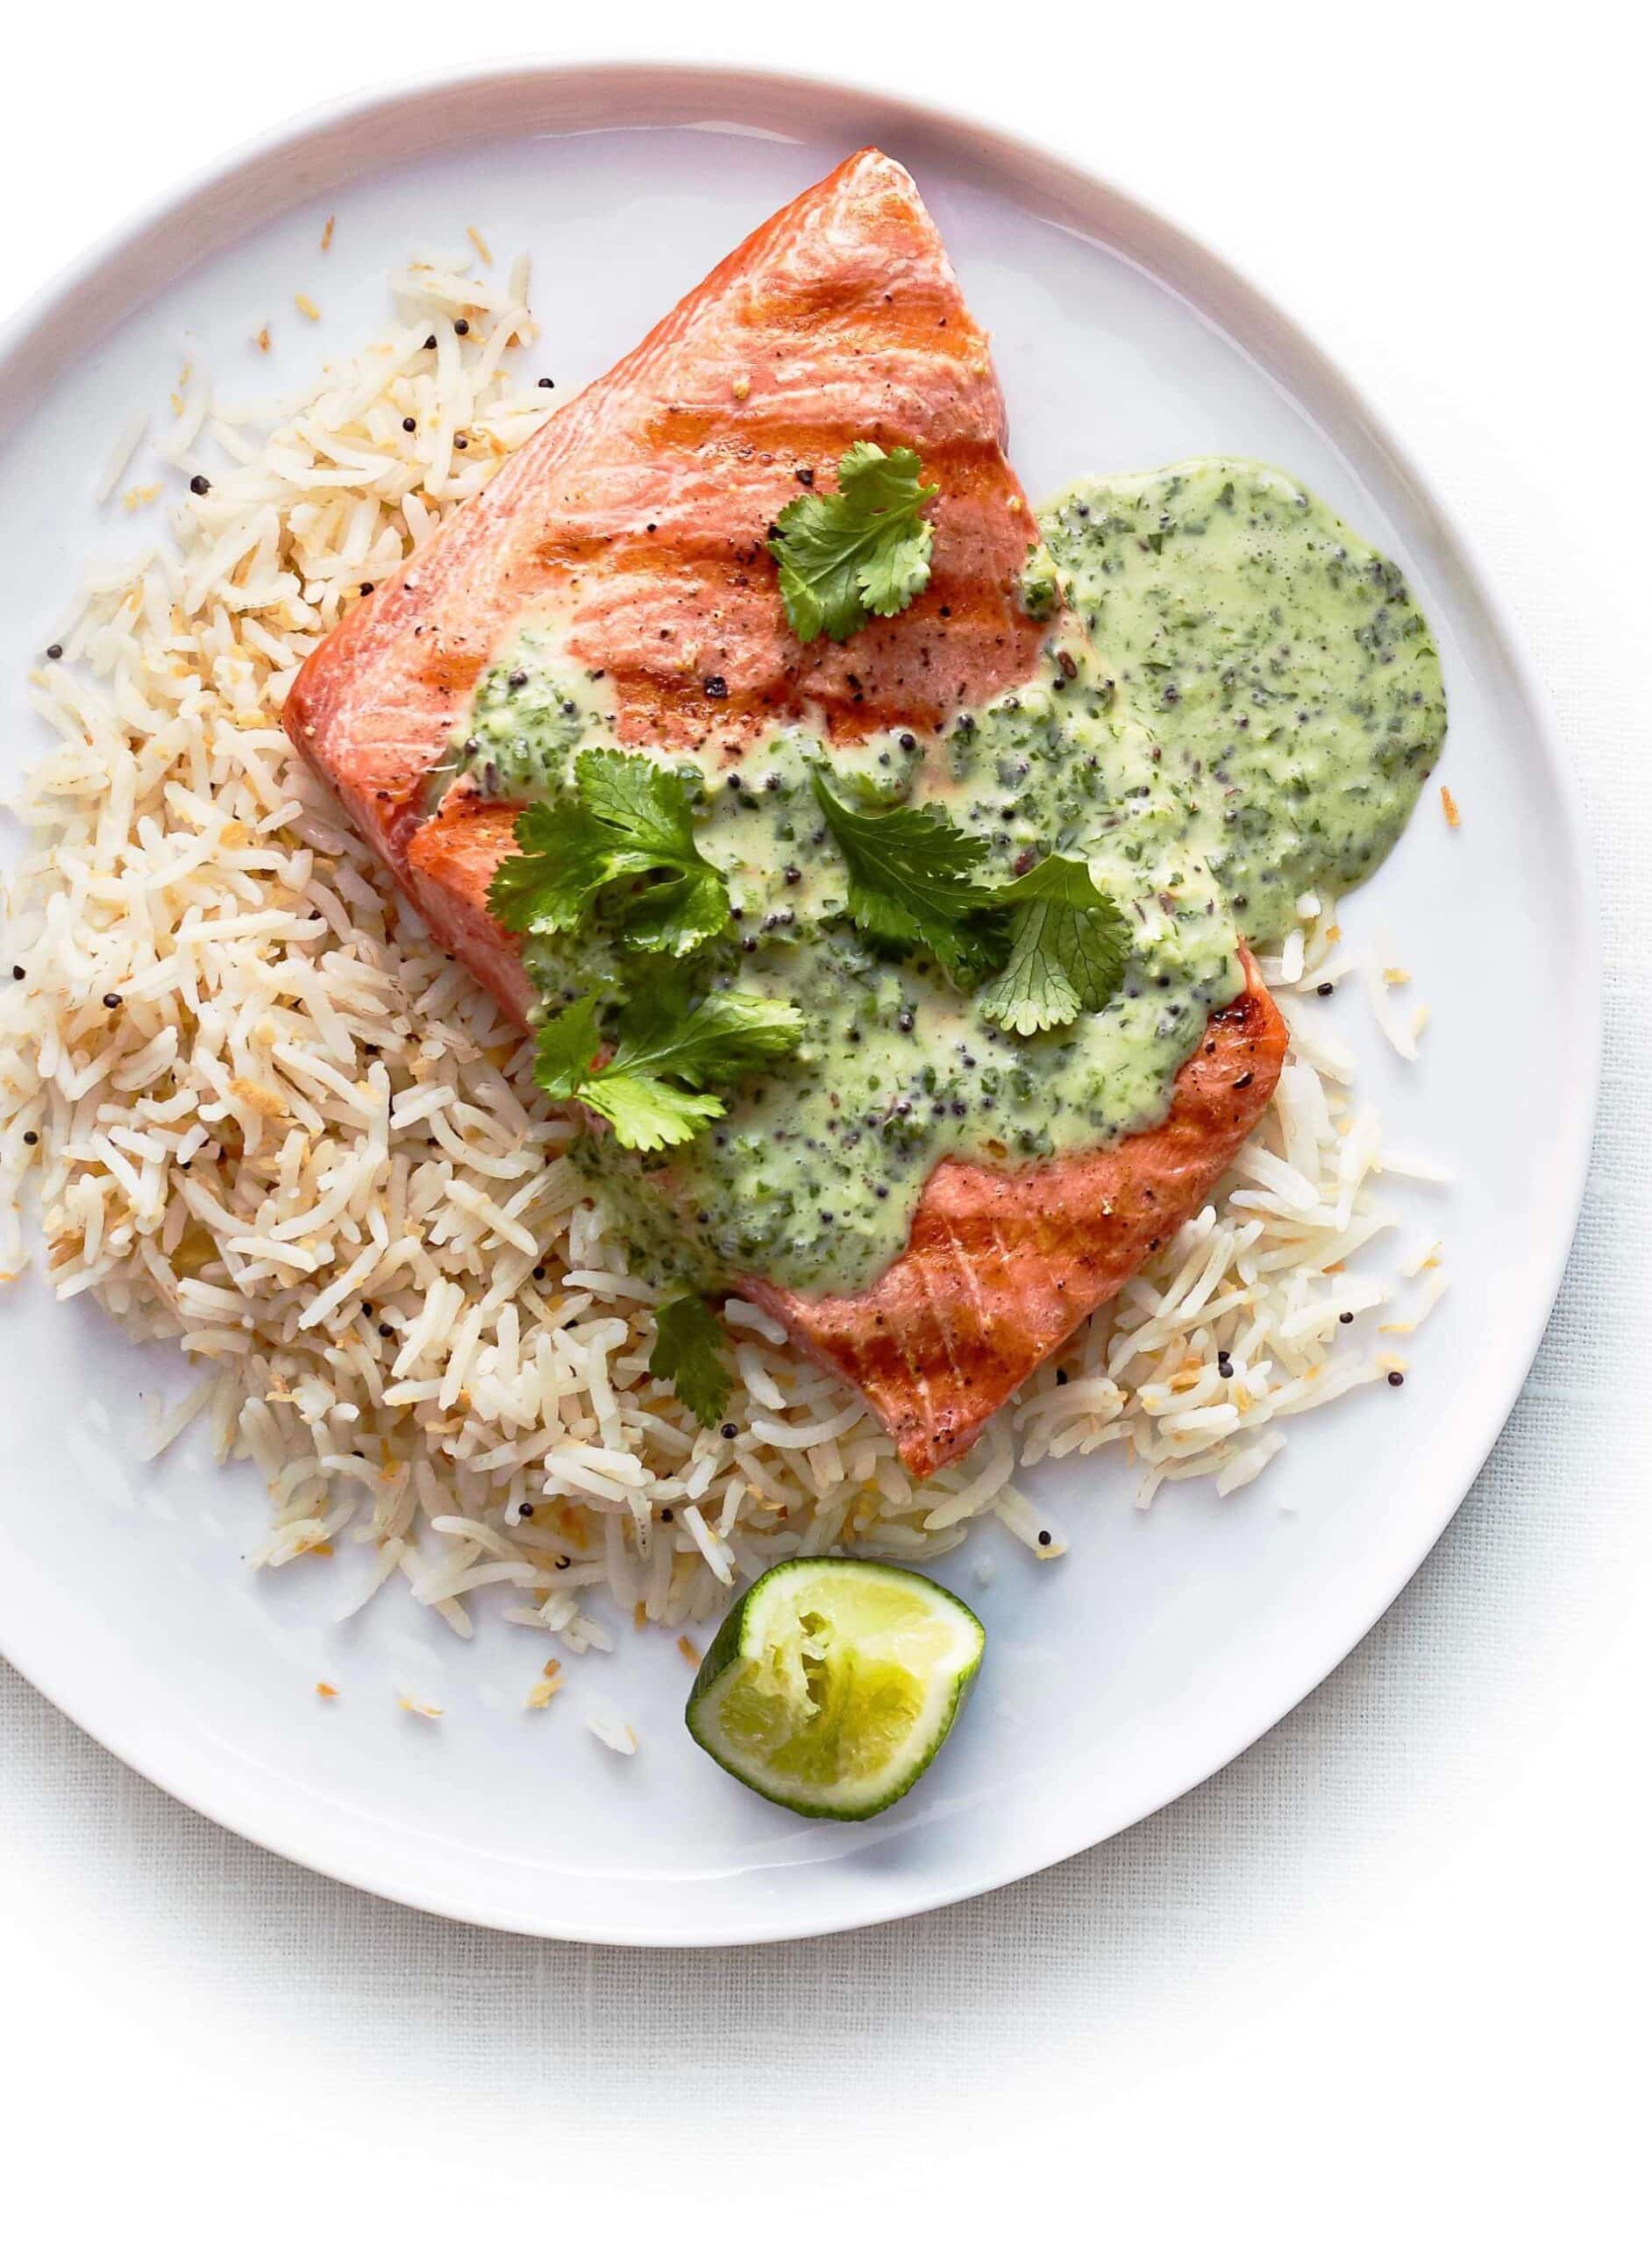 plate of grilled salmon over rice with a green sauce and herb topping